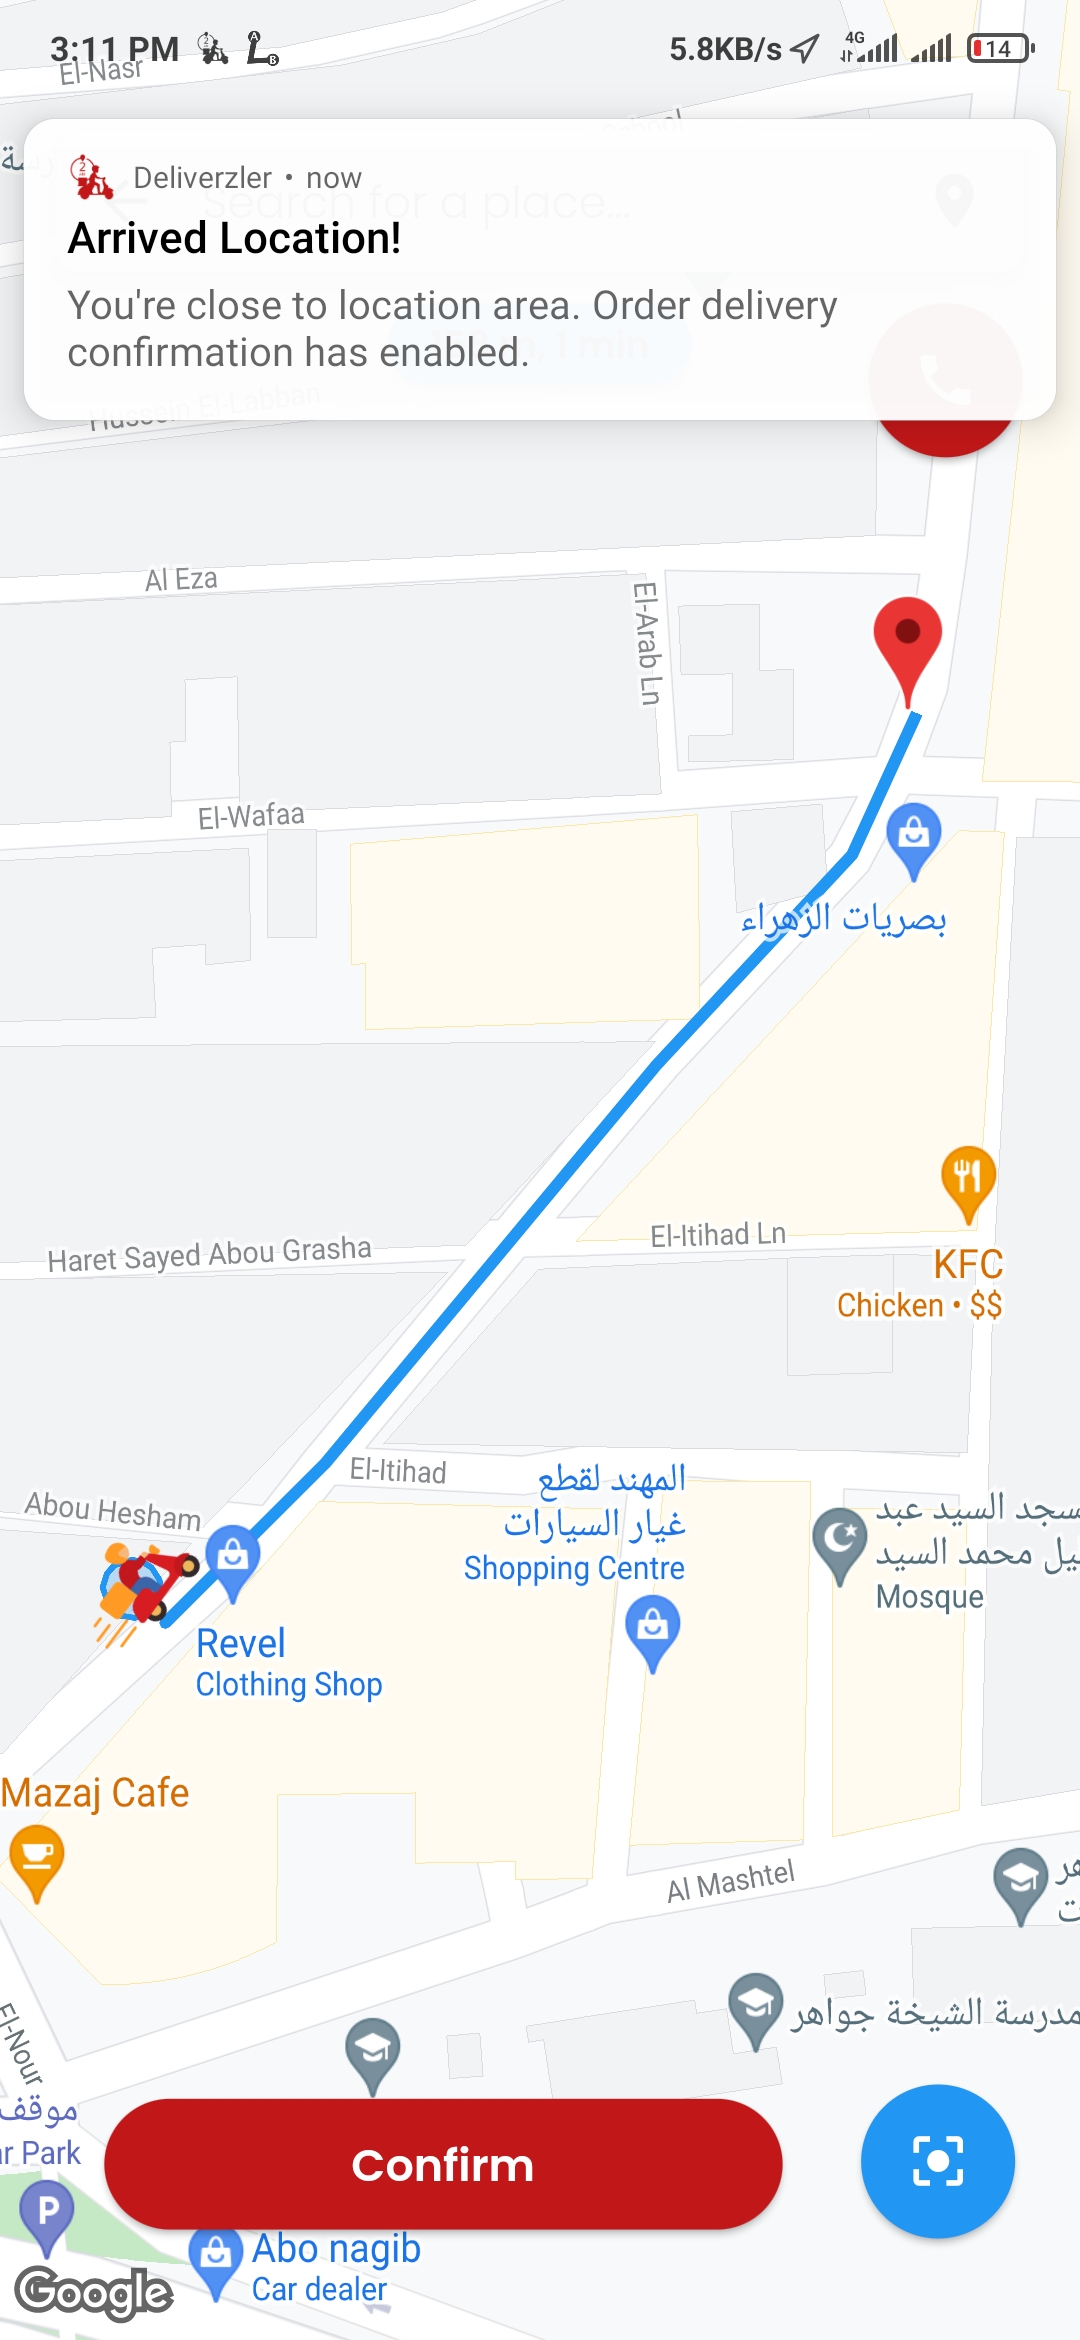 Delivery App for Restaurants built on Flutter with Firebase, Google Maps, Local Notifications, FCM Notifications